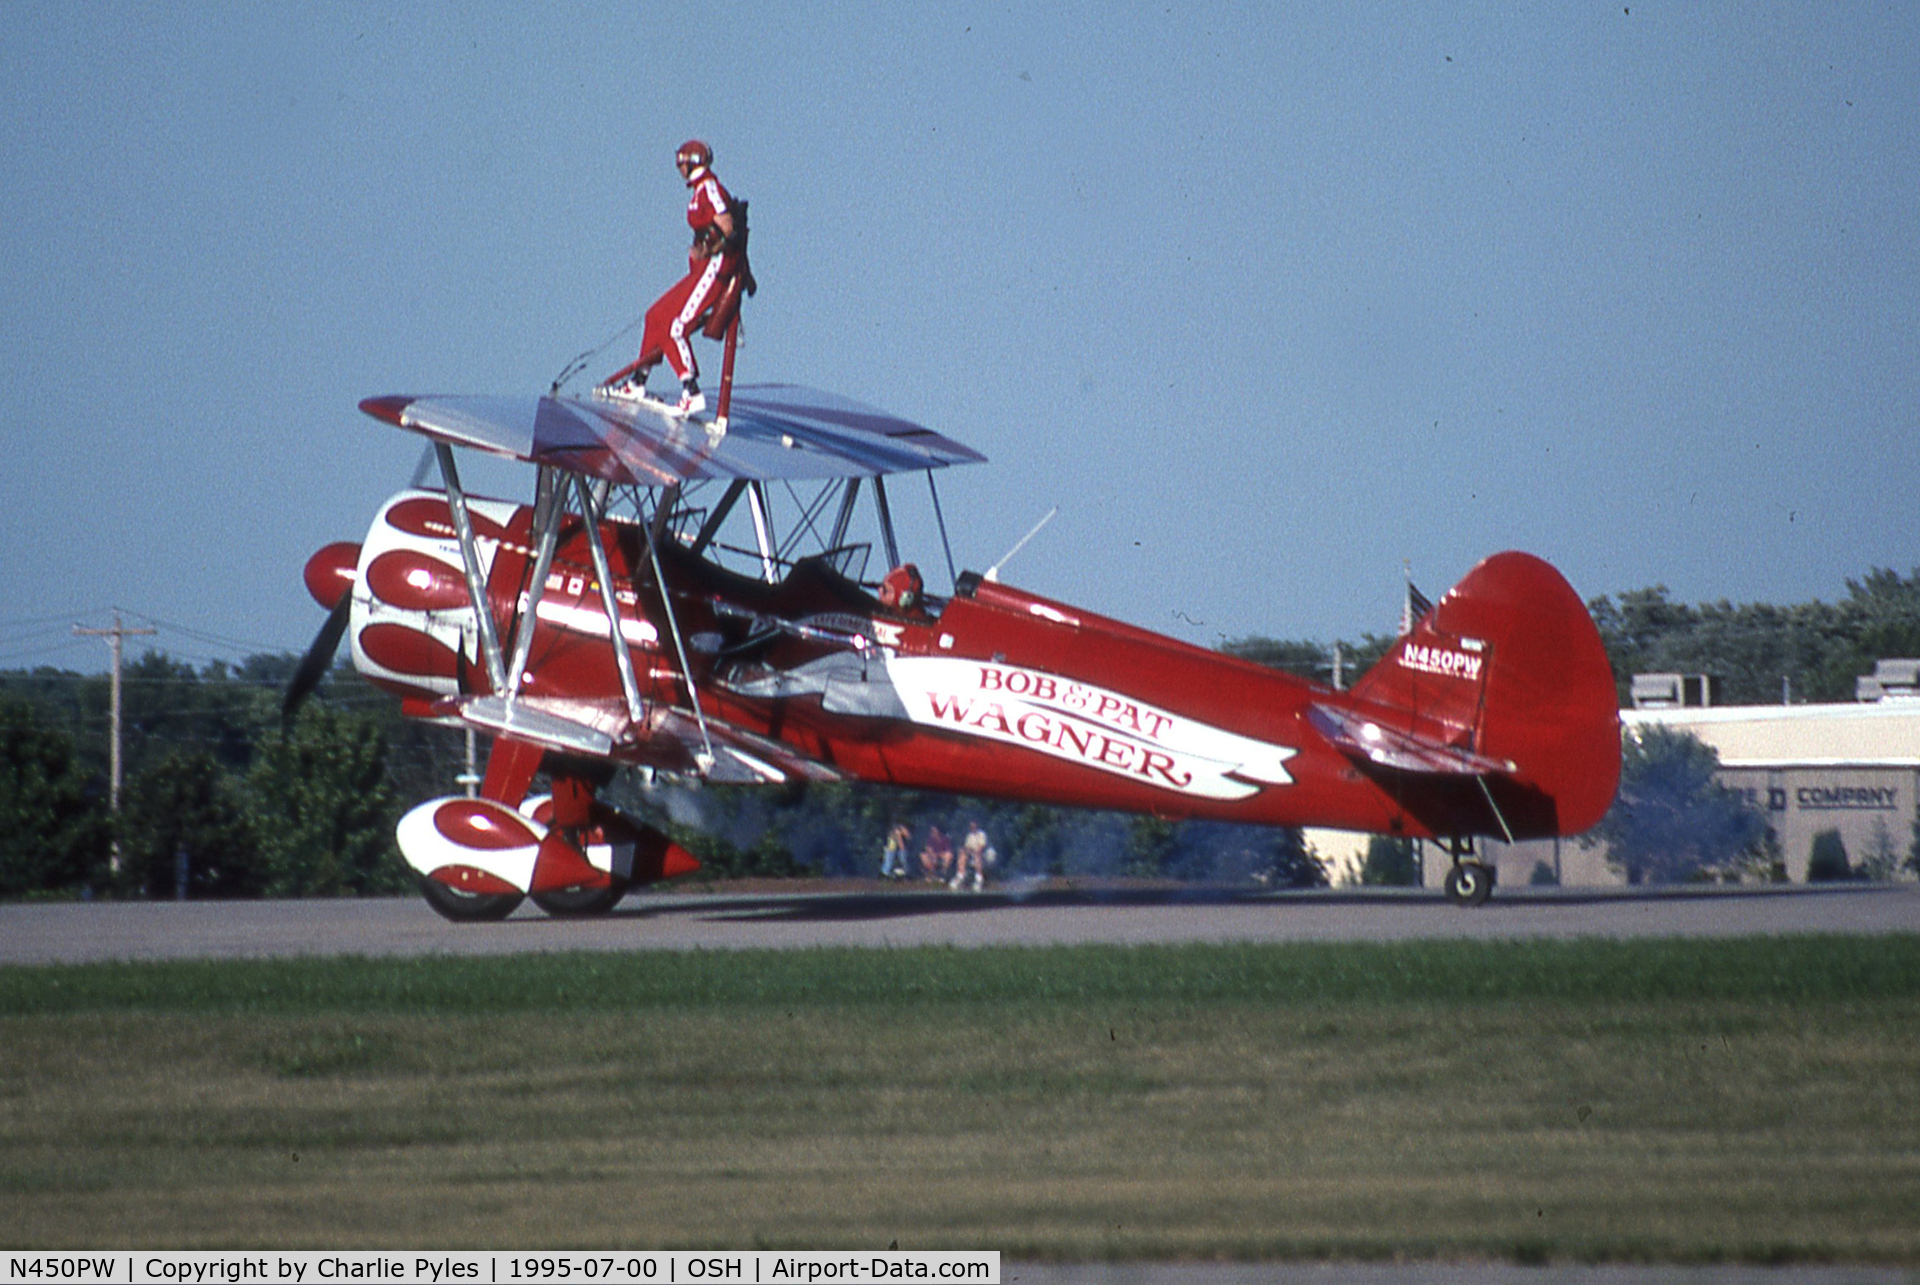 N450PW, 1941 Boeing A75N1(PT17) C/N 75-4621, My friends Bob and Patty Wagner at Oshkosh 1995 the last time I saw Patty perform.